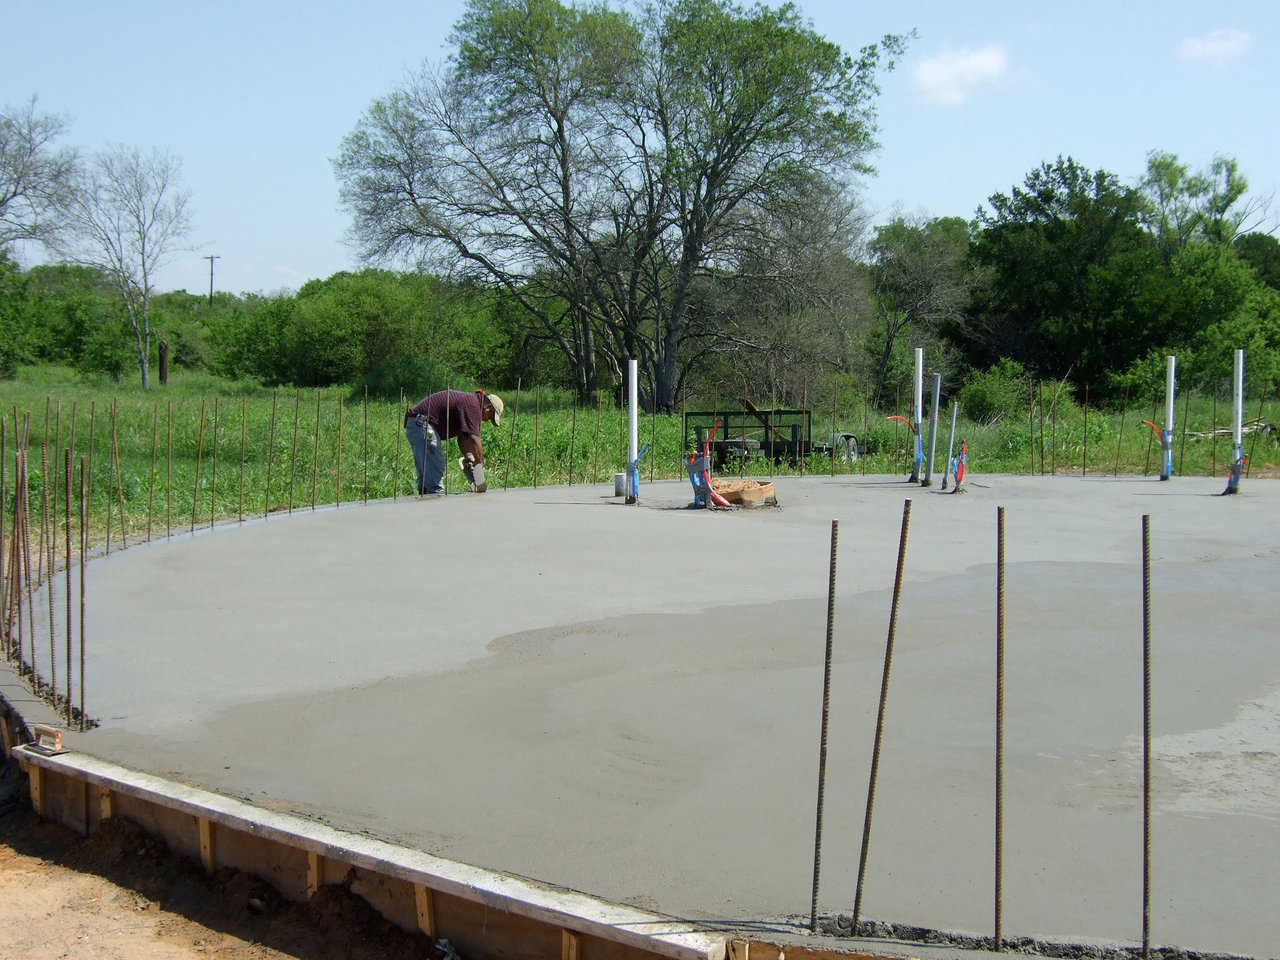 Concrete Floor — Our crew had just finished pouring a concrete floor for a new Monolithic Dome home.  A worker walks around the floor, cutting out the keyway.  The keyway is the 2" wide cutout that goes around the rebar uprights.